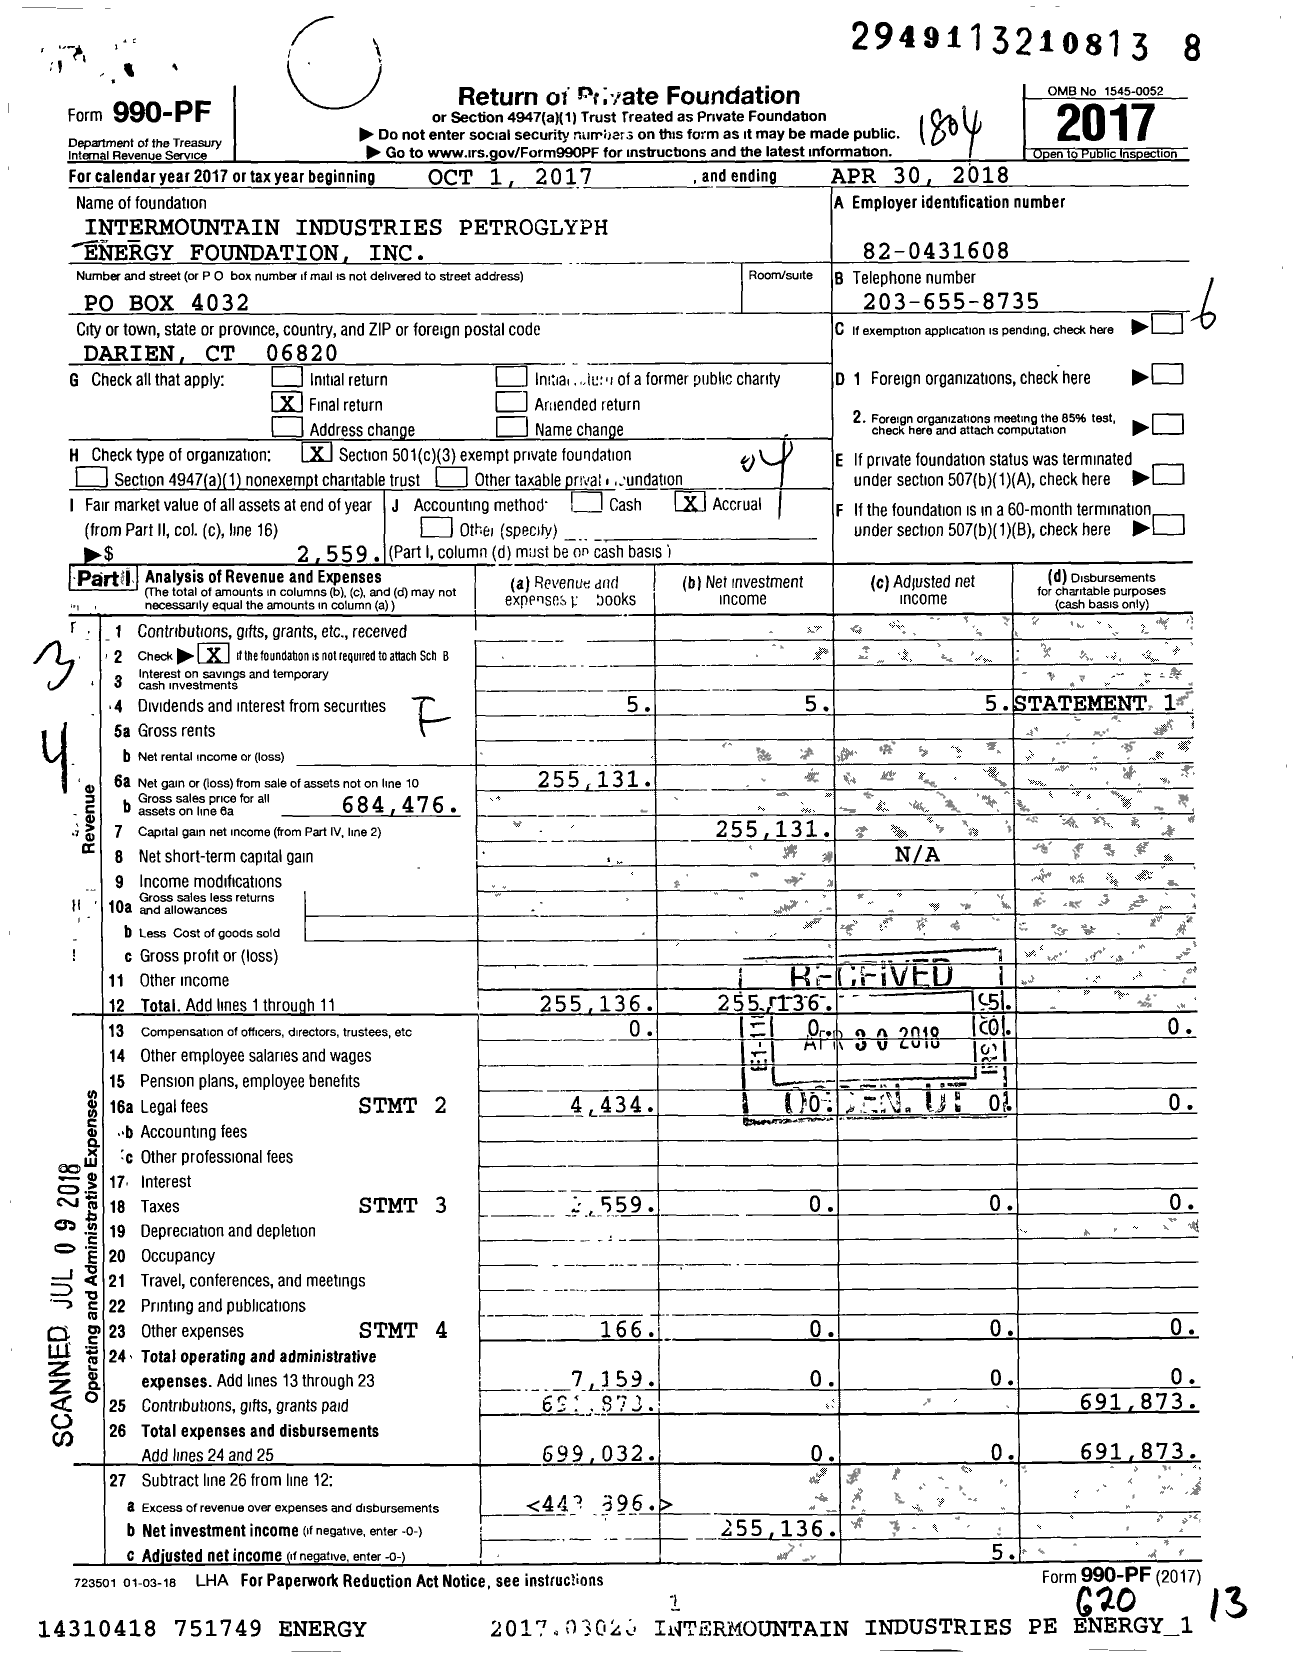 Image of first page of 2017 Form 990PF for Intermountain Industries Petroglyph Energy Foundation